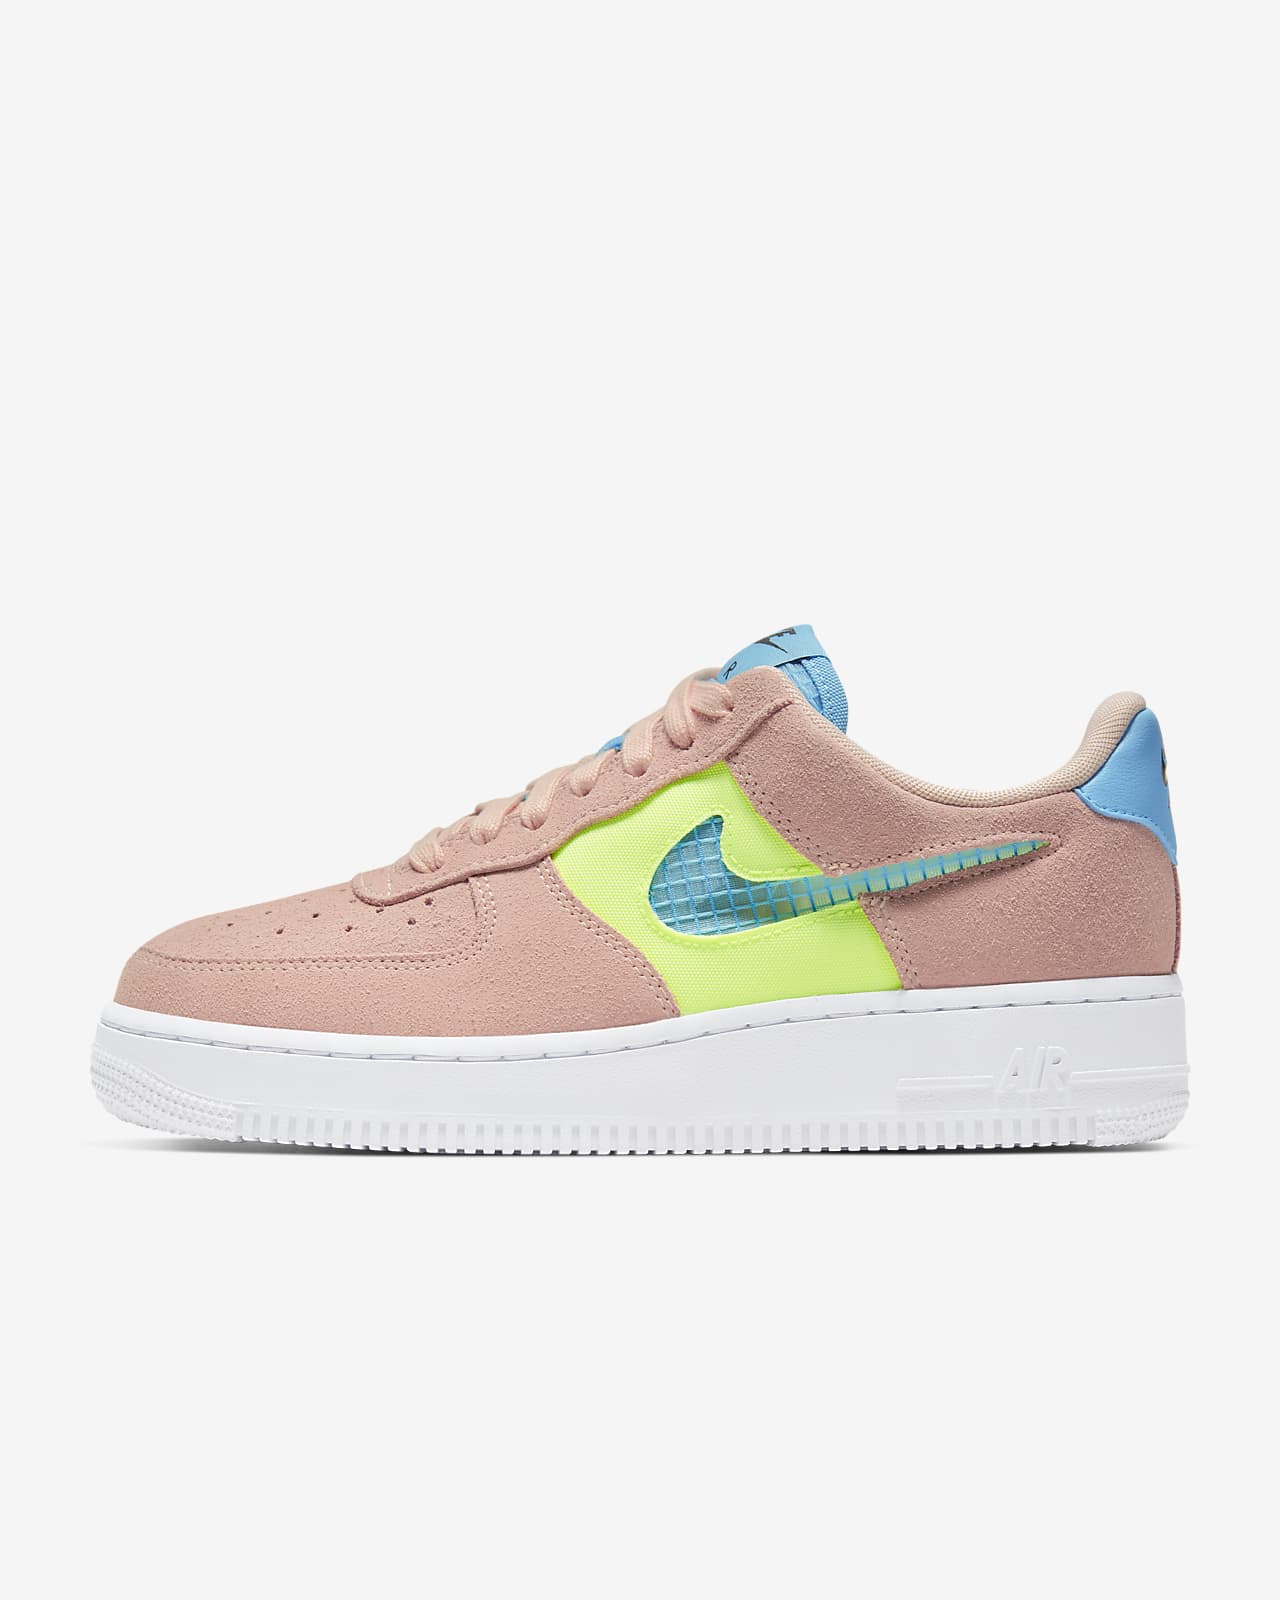 nike air force 1 on